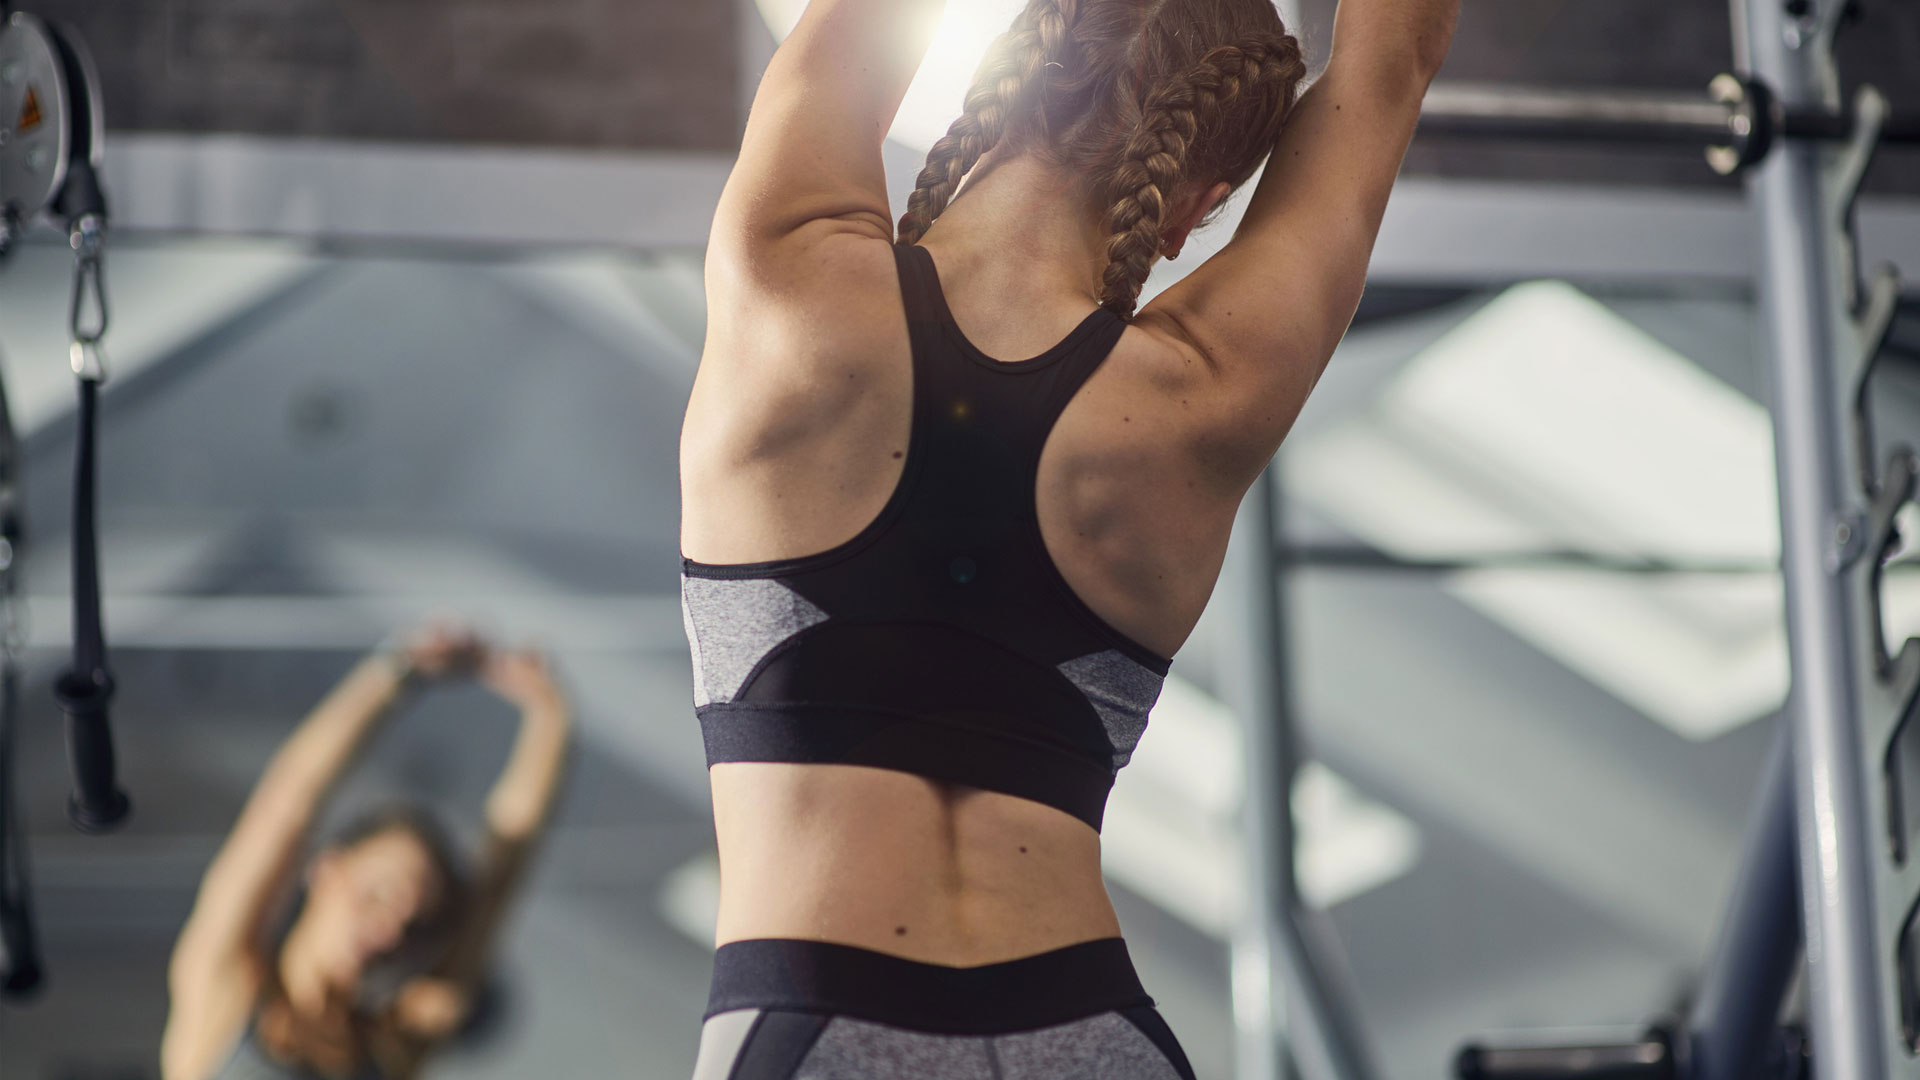 image shows woman in gym stretching